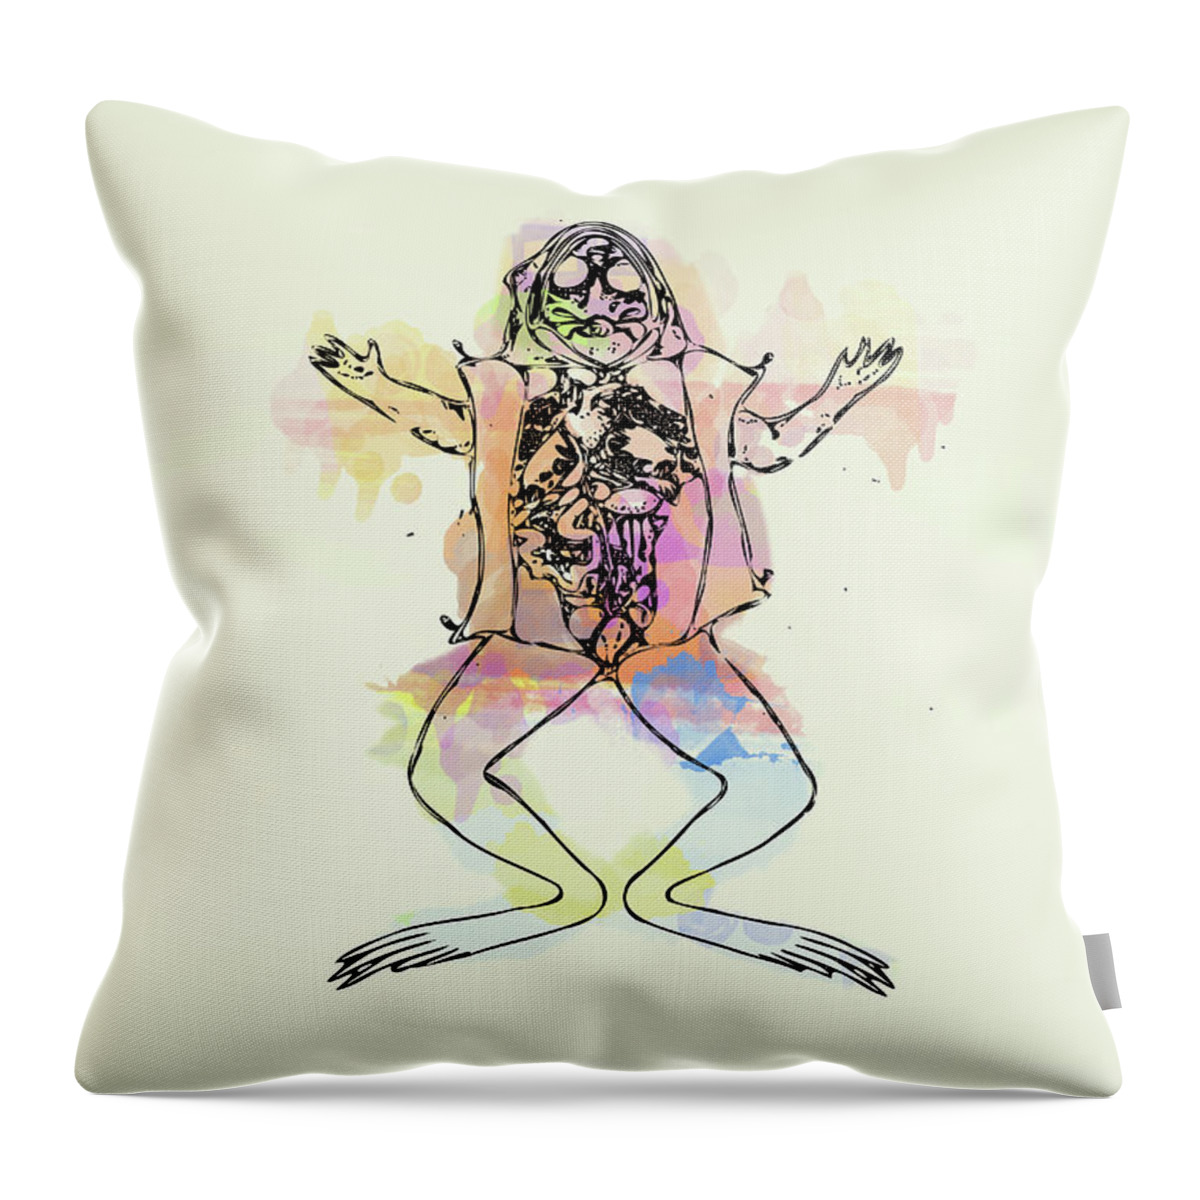 Conceptual Throw Pillow featuring the digital art Pop Goes Frog 1 by Keshava Shukla